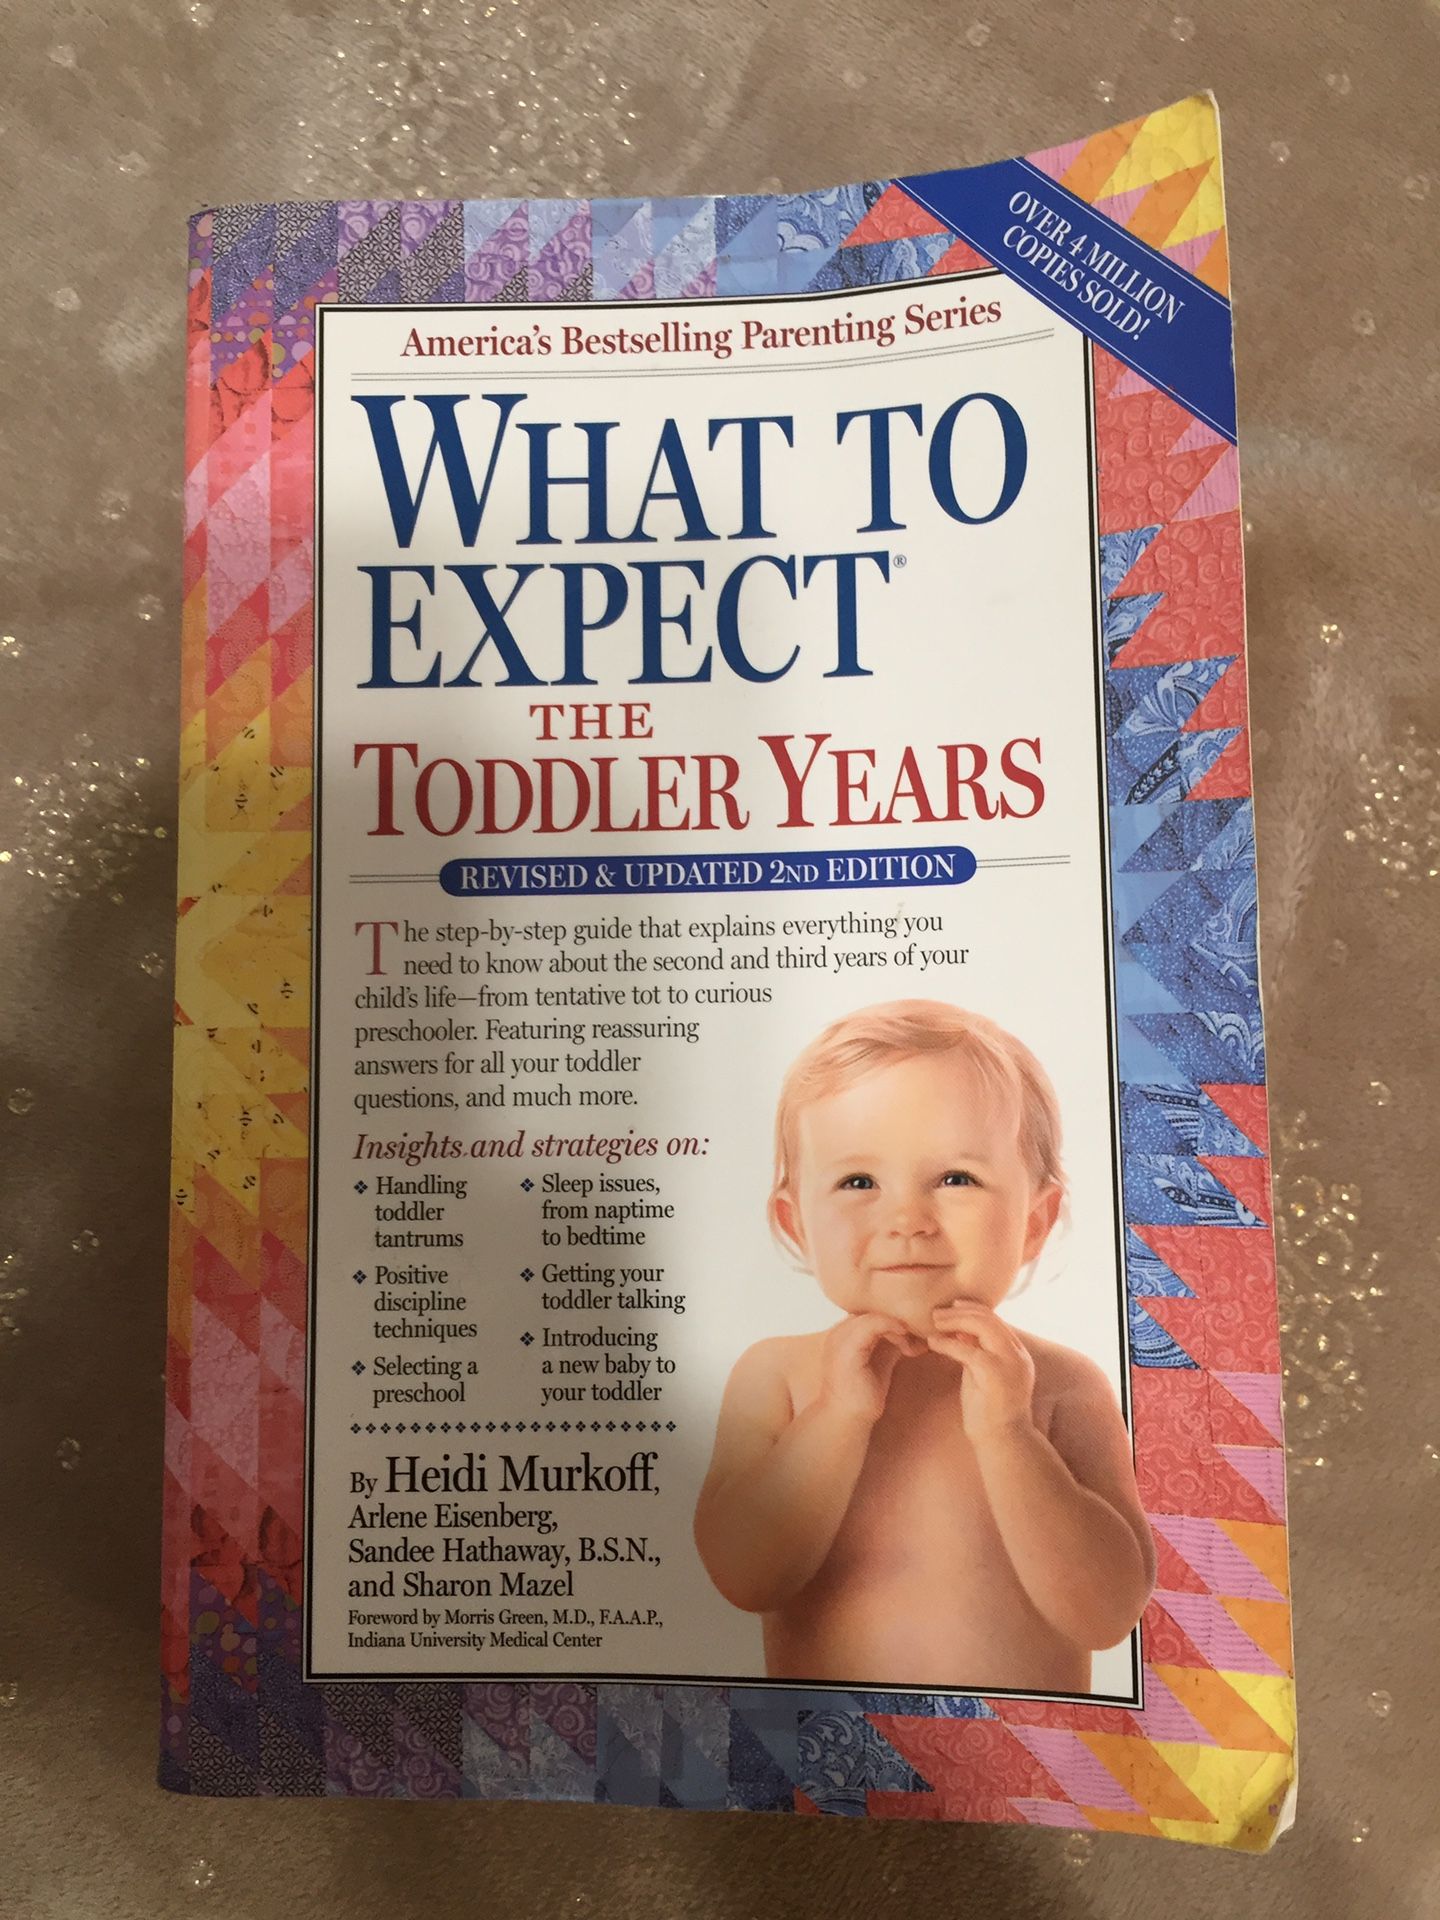 WHAT TO EXPECT - THE TODDLER YEARS BOOK